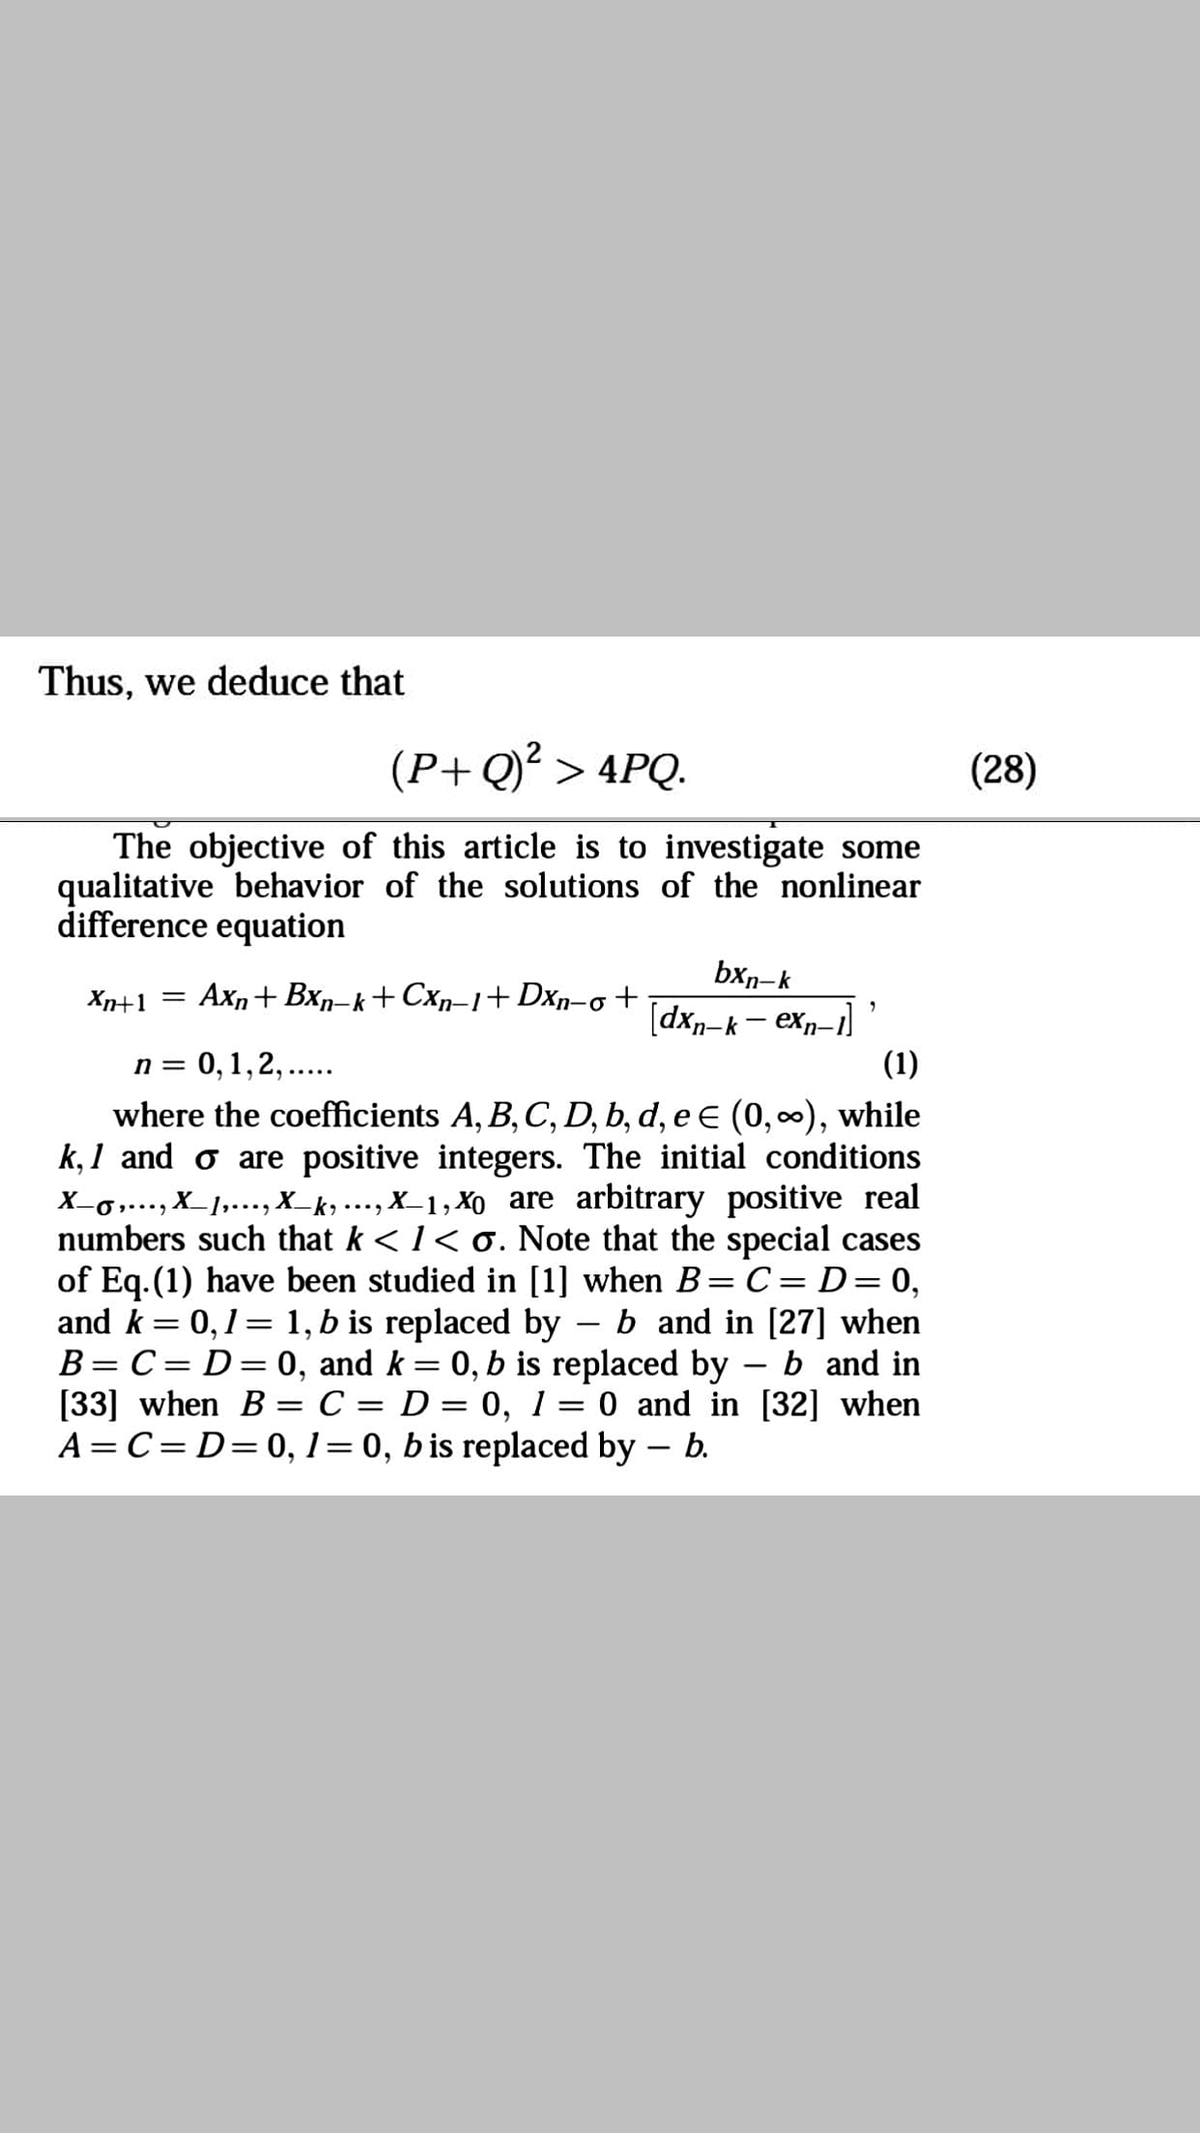 Thus, we deduce that
(P+ Q)² > 4PQ.
(28)
The objective of this article is to investigate some
qualitative behavior of the solutions of the nonlinear
difference equation
bxn-k
[dxn-k - exp-1)
Xn+1 =
Axn+ Bxn-k+Cxn–1+Dxn-o +
n = 0,1,2,..
where the coefficients A, B, C, D, b, d, e e (0,00), while
k, 1 and o are positive integers. The initial conditions
X-6…, X_1,..., X_k, ..., X_1, Xo are arbitrary positive real
numbers such that k <1< o. Note that the special cases
of Eq.(1) have been studied in [1] when B= C = D=0,
and k= 0,1= 1, b is replaced by – b and in [27] when
B= C= D=0, and k= 0, b is replaced by
[33] when B = C = D = 0, 1 = 0 and in [32] when
A = C= D=0, 1= 0, b is replaced by – b.
(1)
b and in
%3D
